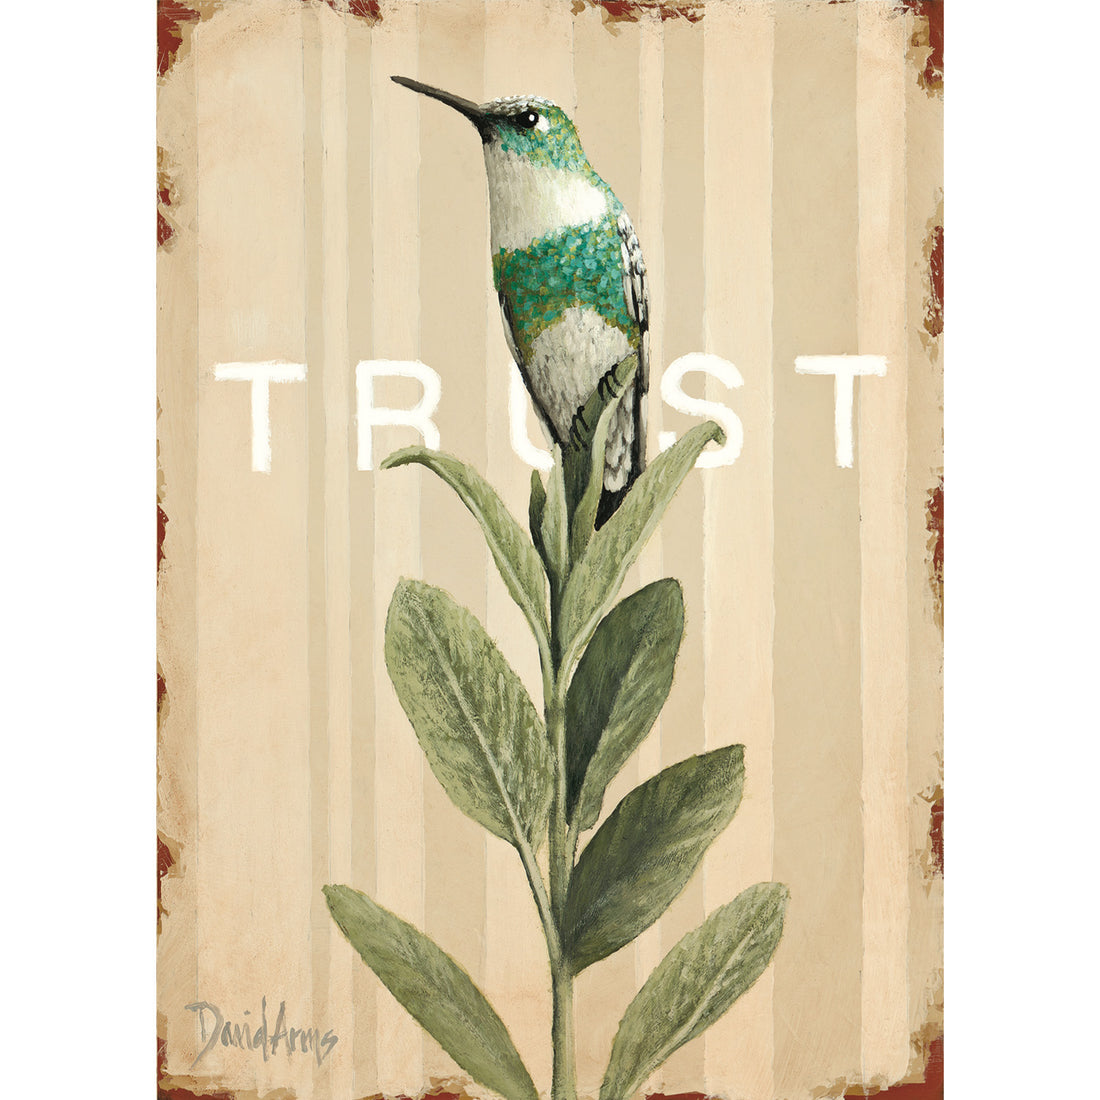 A illustration of a white and green hummingbird resting on a sprig of sage over a beige-striped background, with &quot;TRUST&quot; printed in white behind the bird.